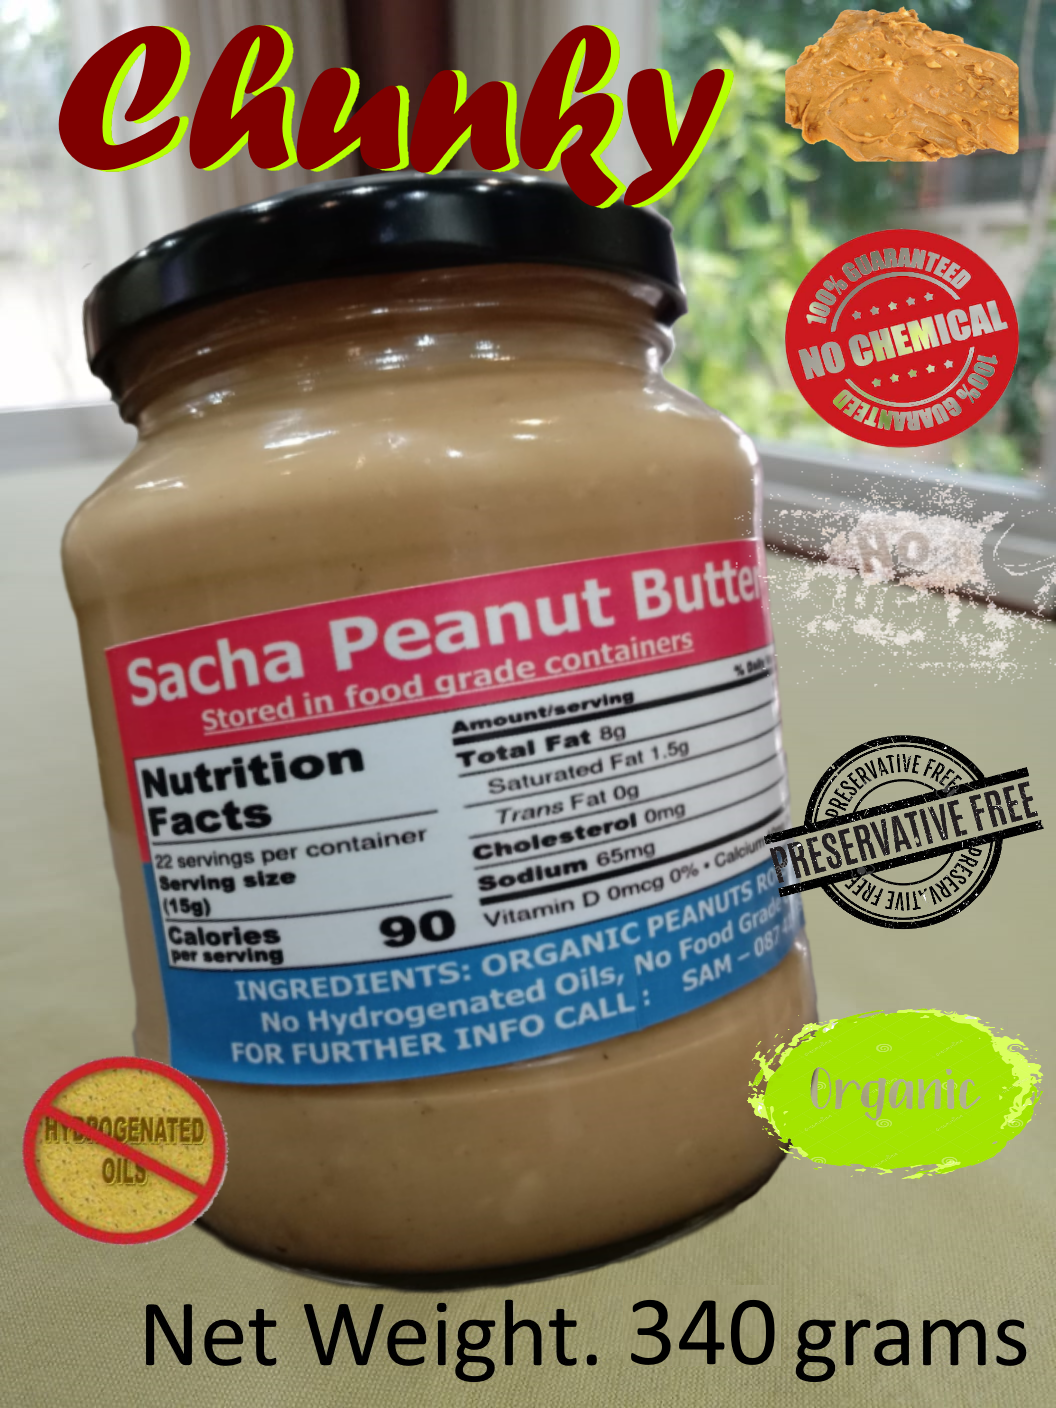 Sacha Peanut Butter (Chunky) All Natural Organic (340 grams) - Free Delivery, ซาช่า-เนยถั่ว (ส่งฟรี)